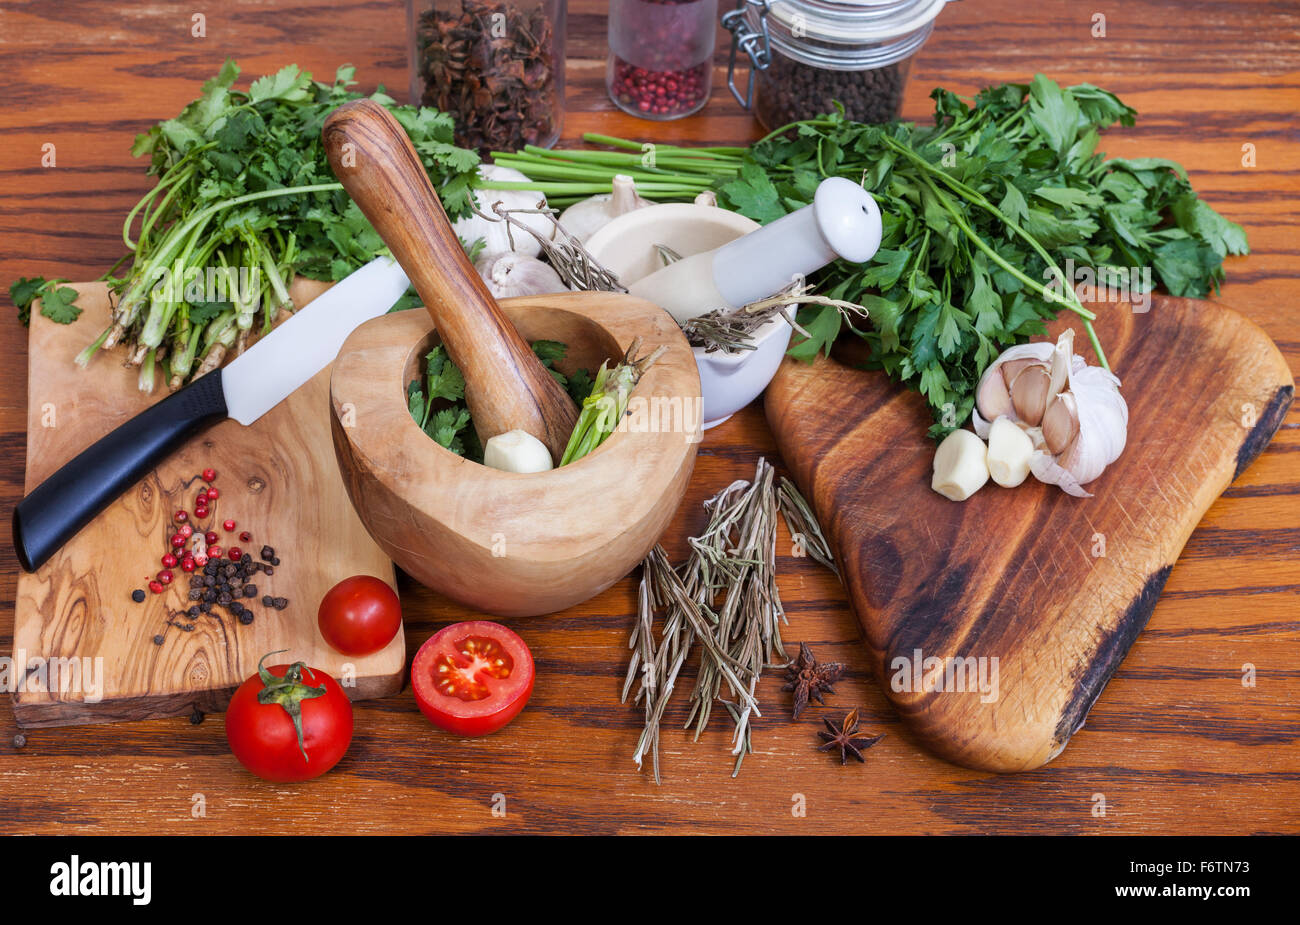 Cooking With Fresh Herbs and Spices